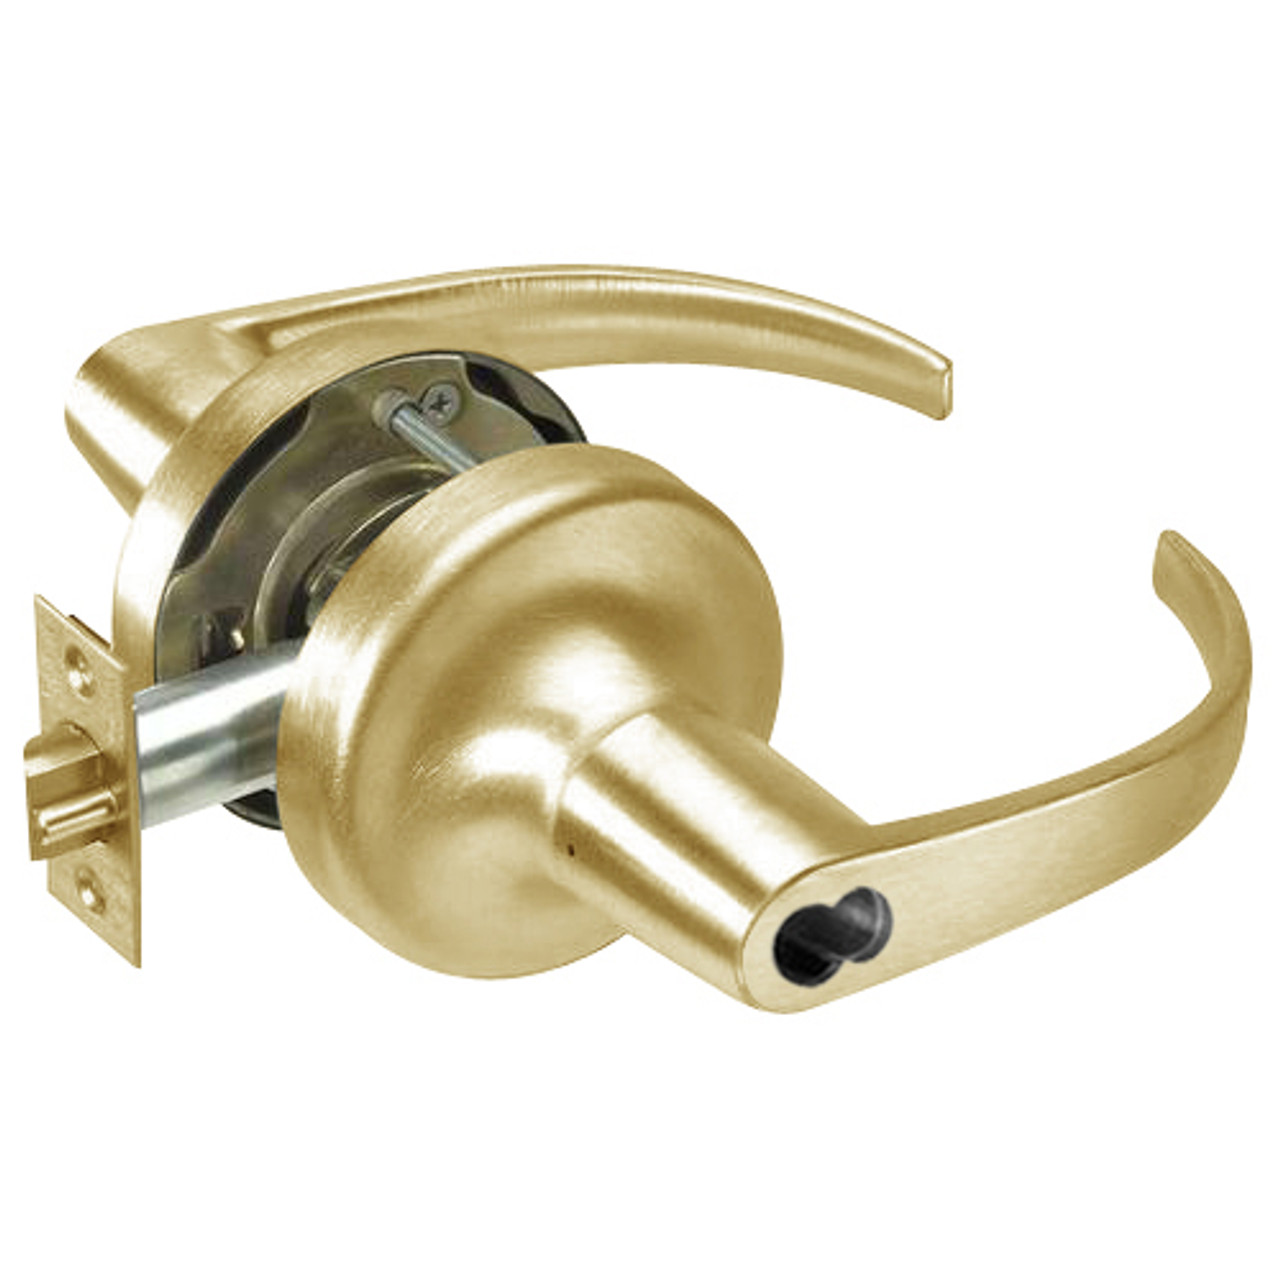 B-PB5305LN-606 Yale 5300LN Series Single Cylinder Storeroom or Closet Cylindrical Lock with Pacific Beach Lever Prepped for SFIC in Satin Brass